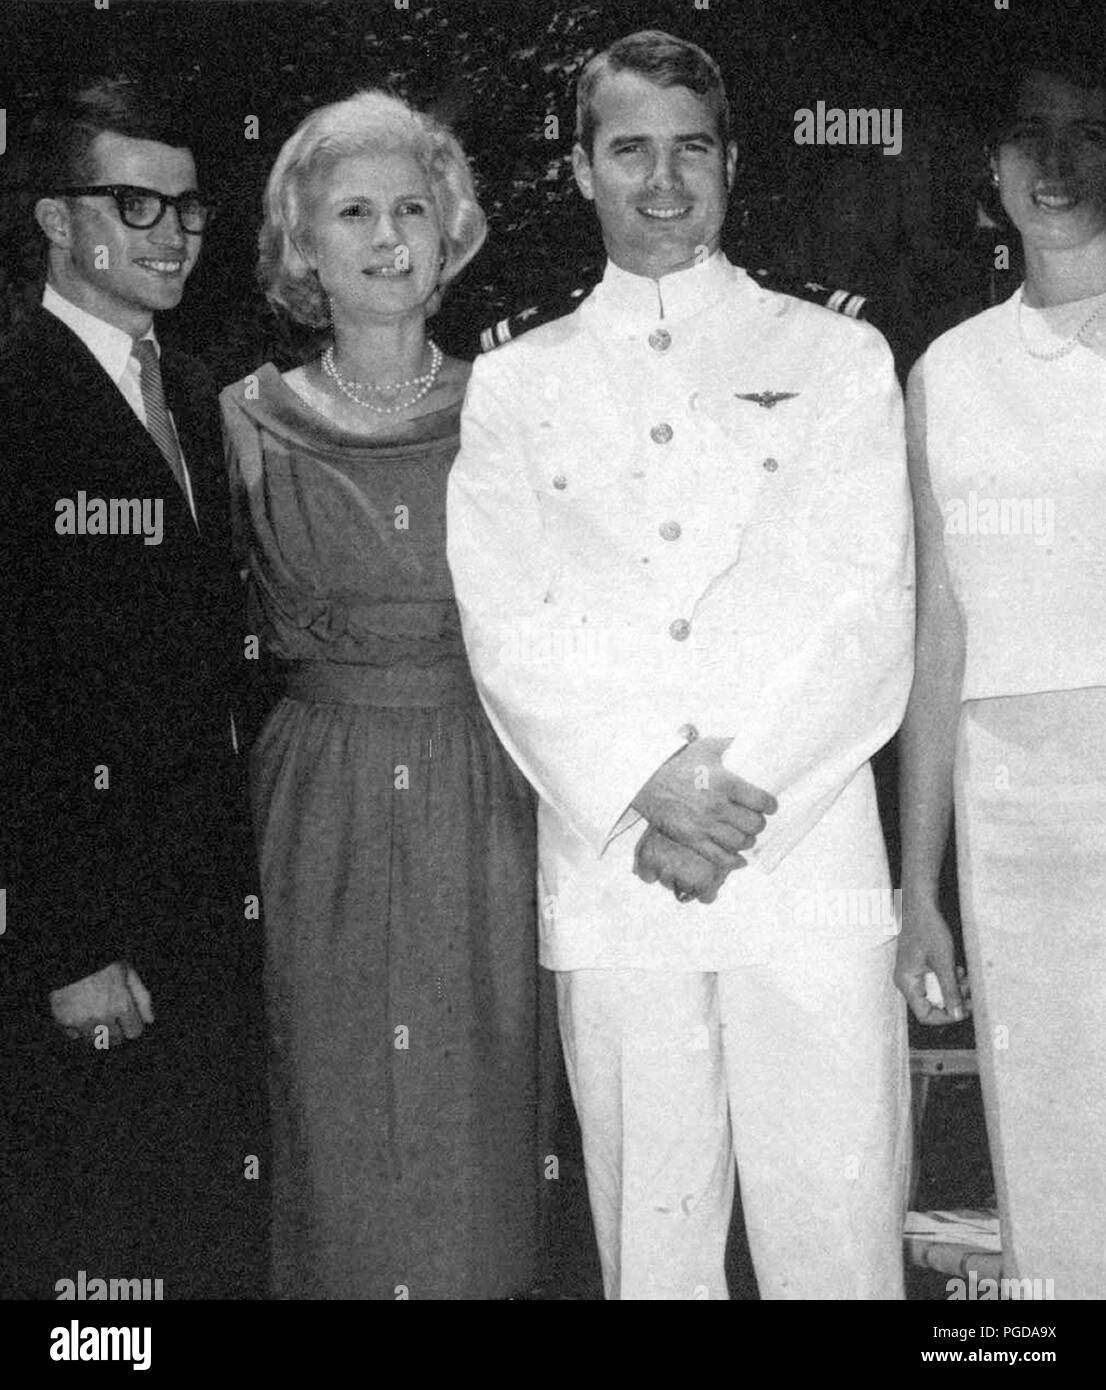 Washington, District of Columbia, USA. 21st July, 2017. (FILE) - Photo from the office of United States Senator John McCain (Republican of Arizona), the presumptive 2008 Republican nominee for President of the United States, taken on July 3, 1965 in Philadelphia showing his mother, Roberta McCain, left center, and her son John S. McCain III, right center. Credit: Courtesy Sen.Mccain/CNP/ZUMA Wire/Alamy Live News Stock Photo